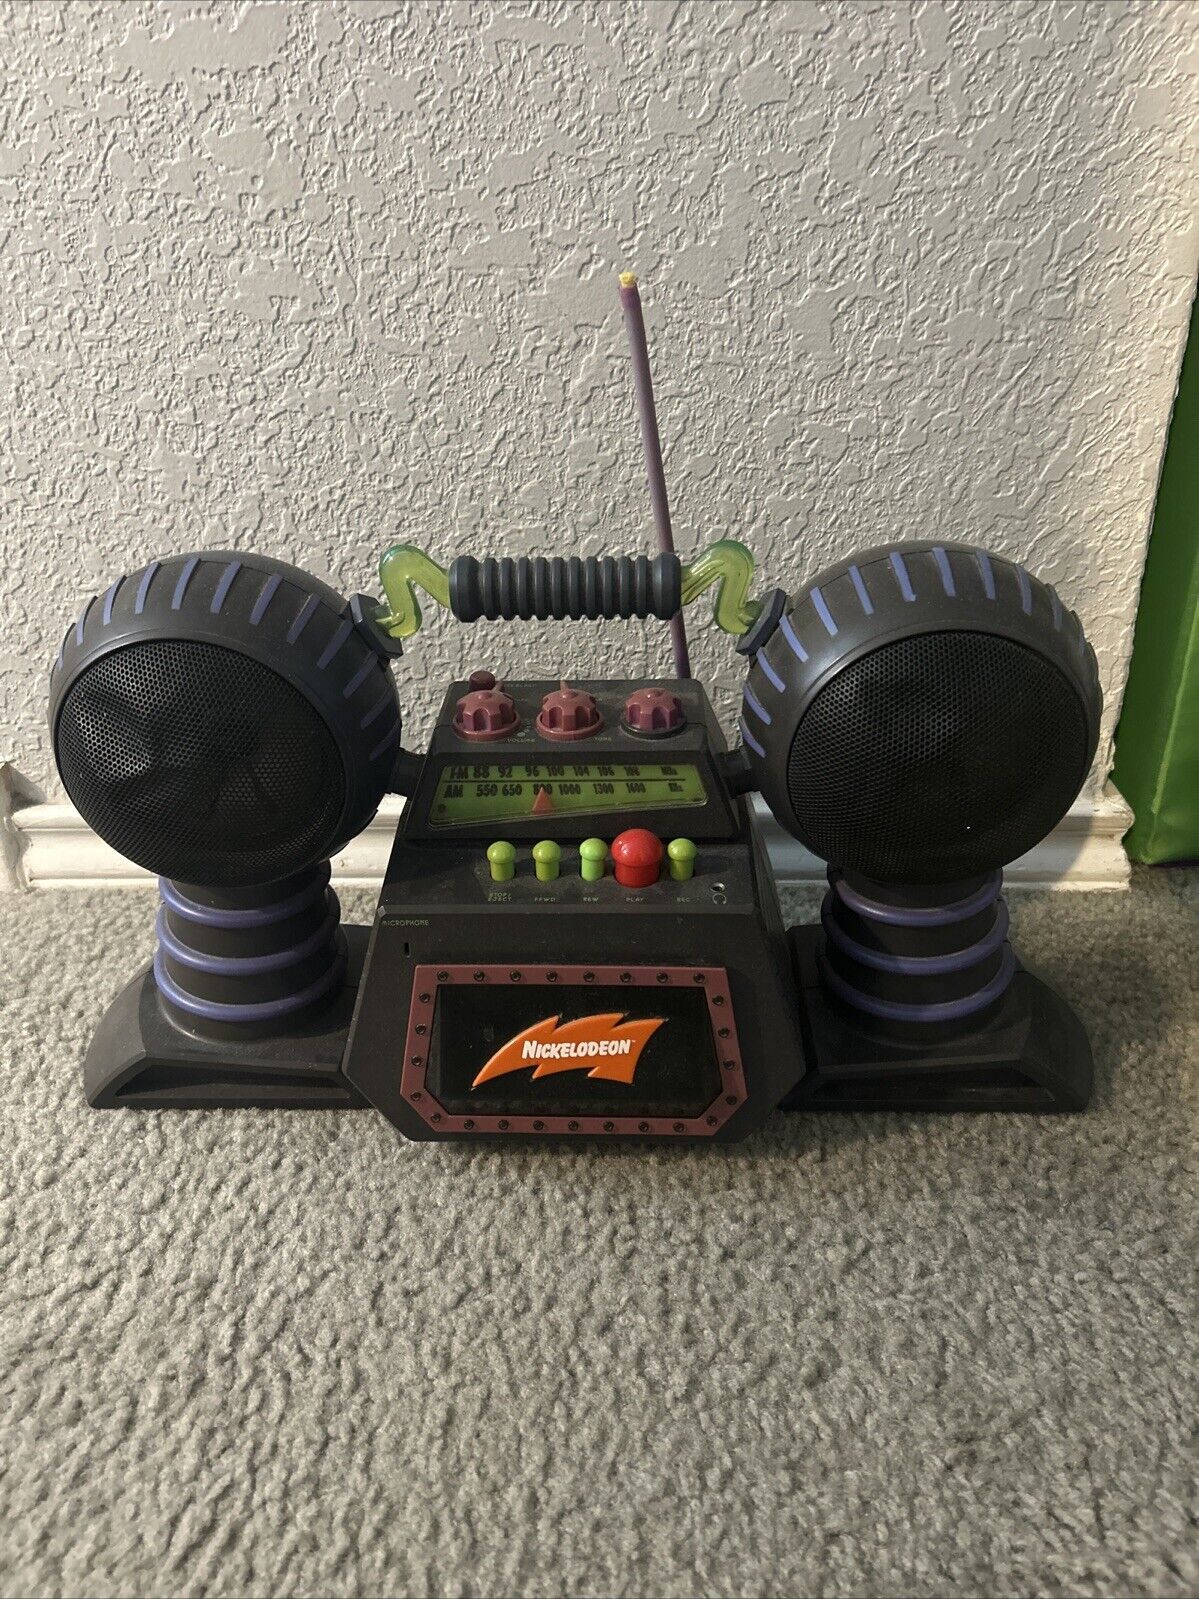 1995 Nickelodeon Blaster Box Radio And Cassette Player Tested Works Great